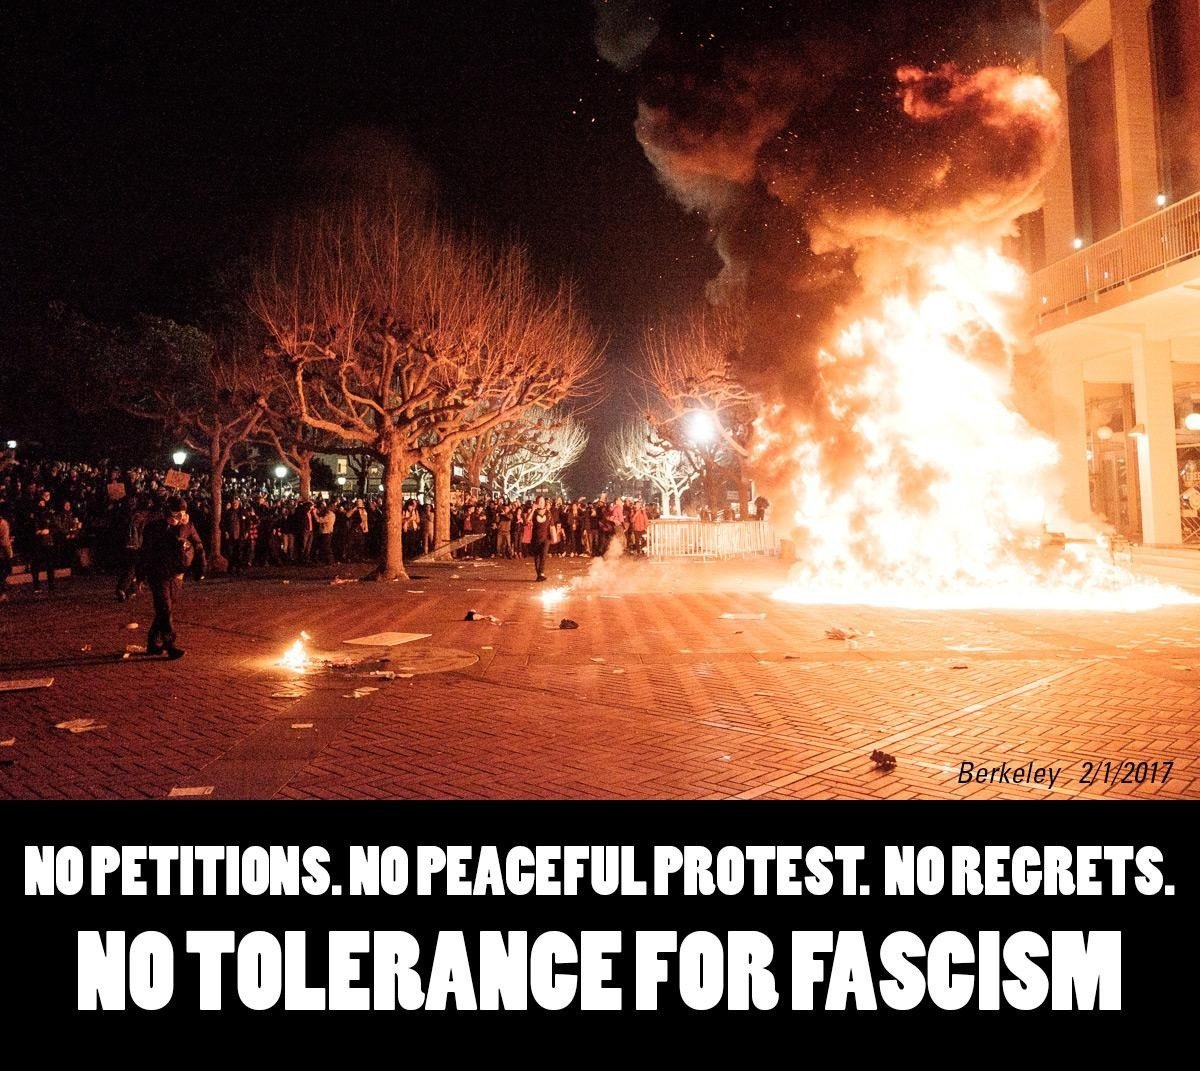 @leftinthebay heres last year's thread that was dropped after Berkley Antifa got kicked off Twitter simply for posting the flyer below. the thread summarizes all the victories of the night including beating Proud Boys back & banks getting destroyed! #AntifascistAction

twitter.com/ADayIn1920/sta…